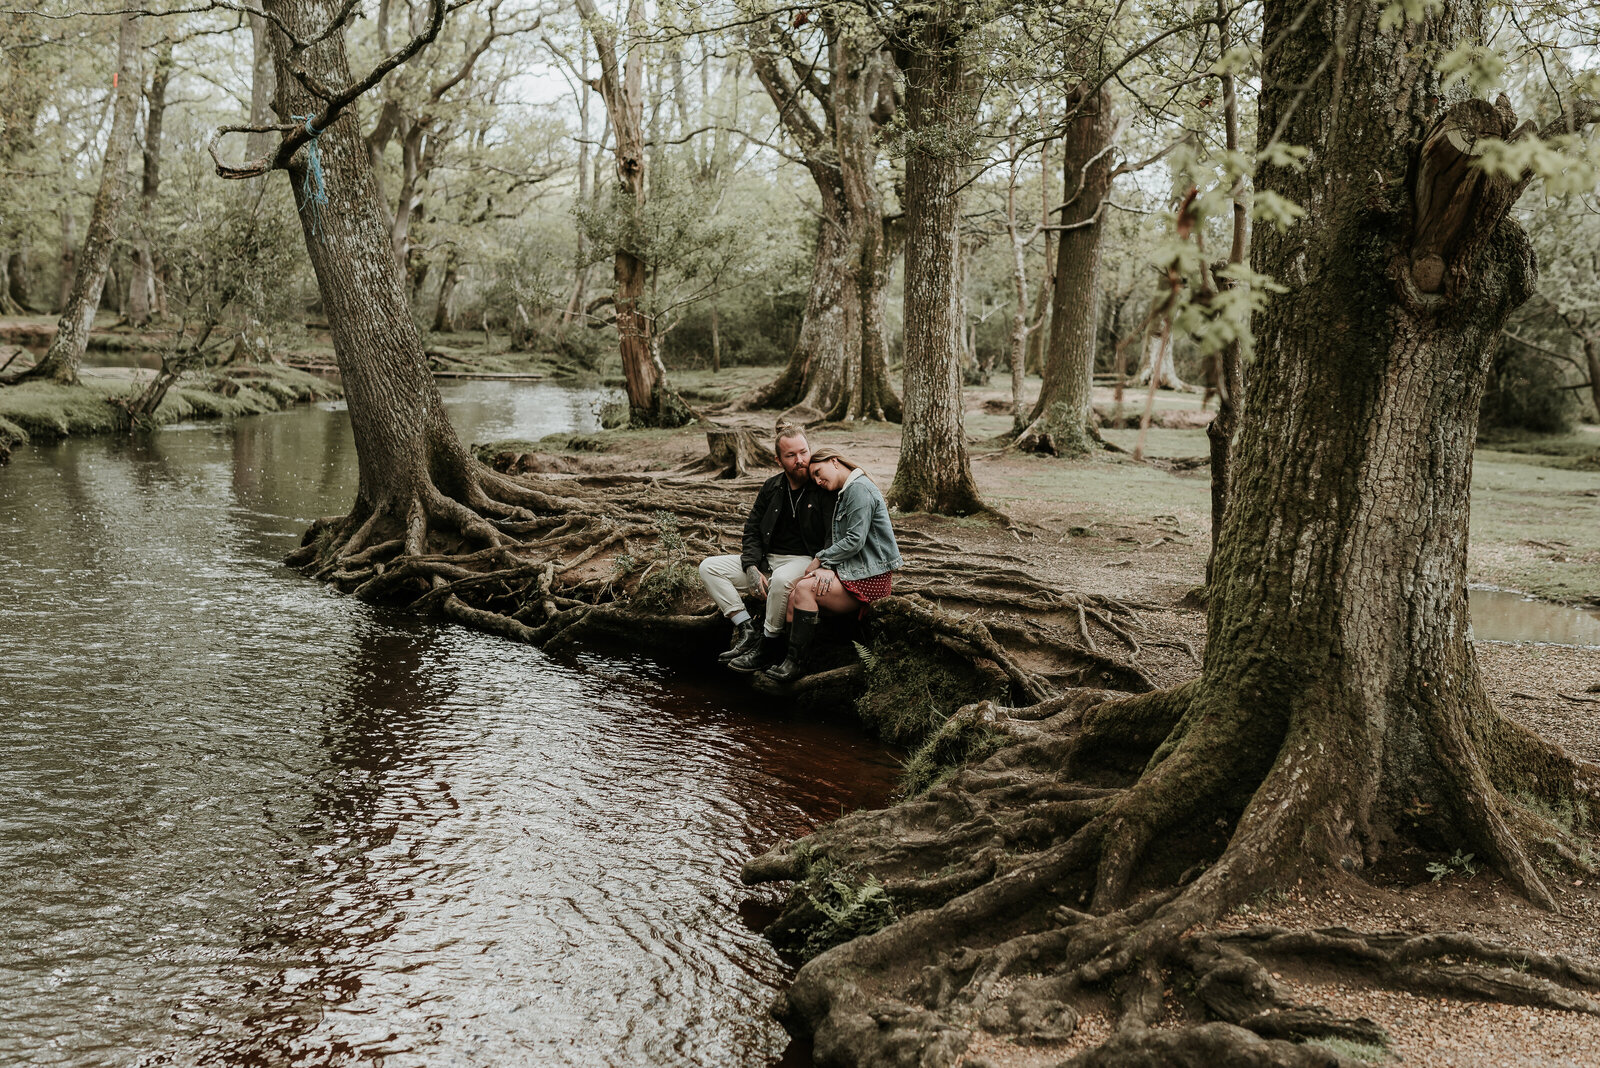 Couple sit along river bank on twisted tree roots in The New Forest